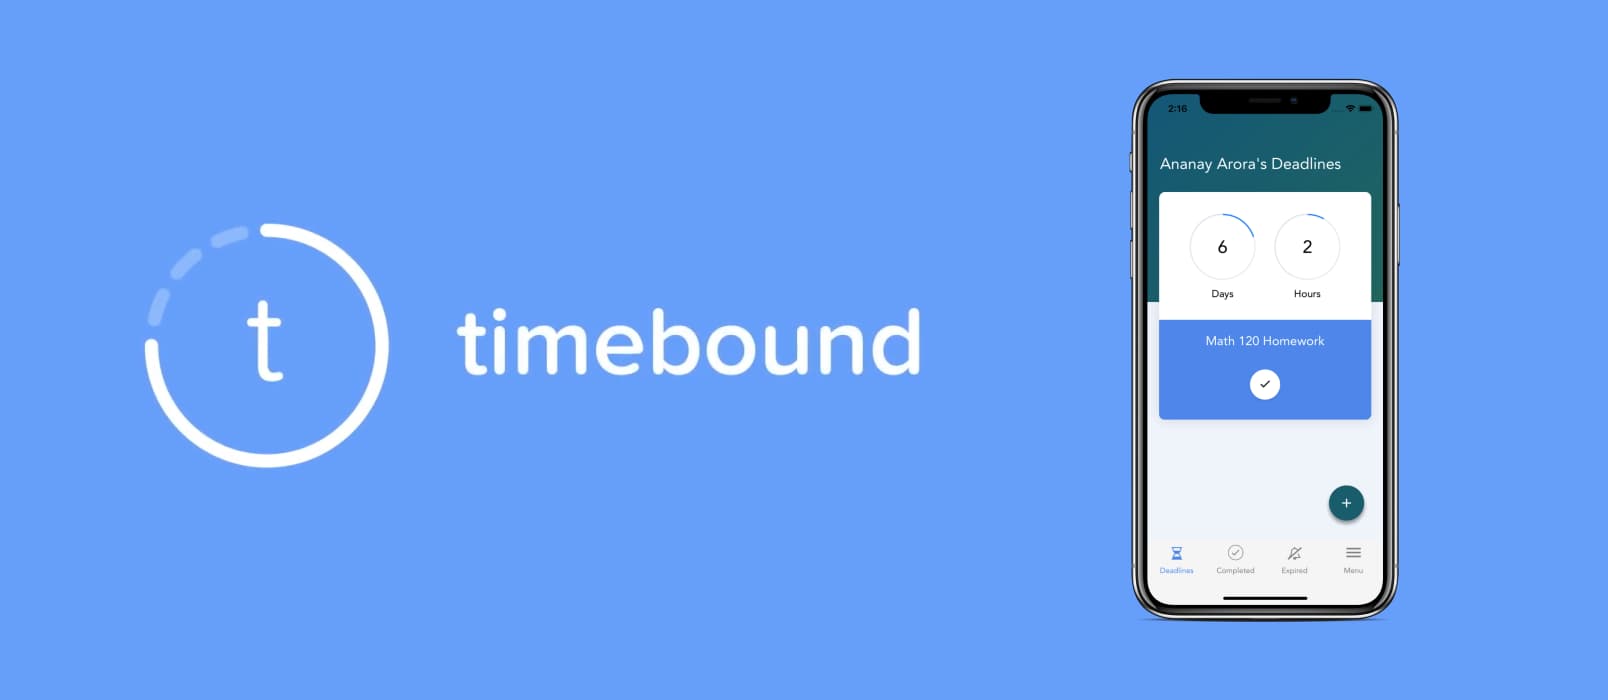 Timebound - 用倒计时显示并提醒 todo 任务[iOS/Android] 1